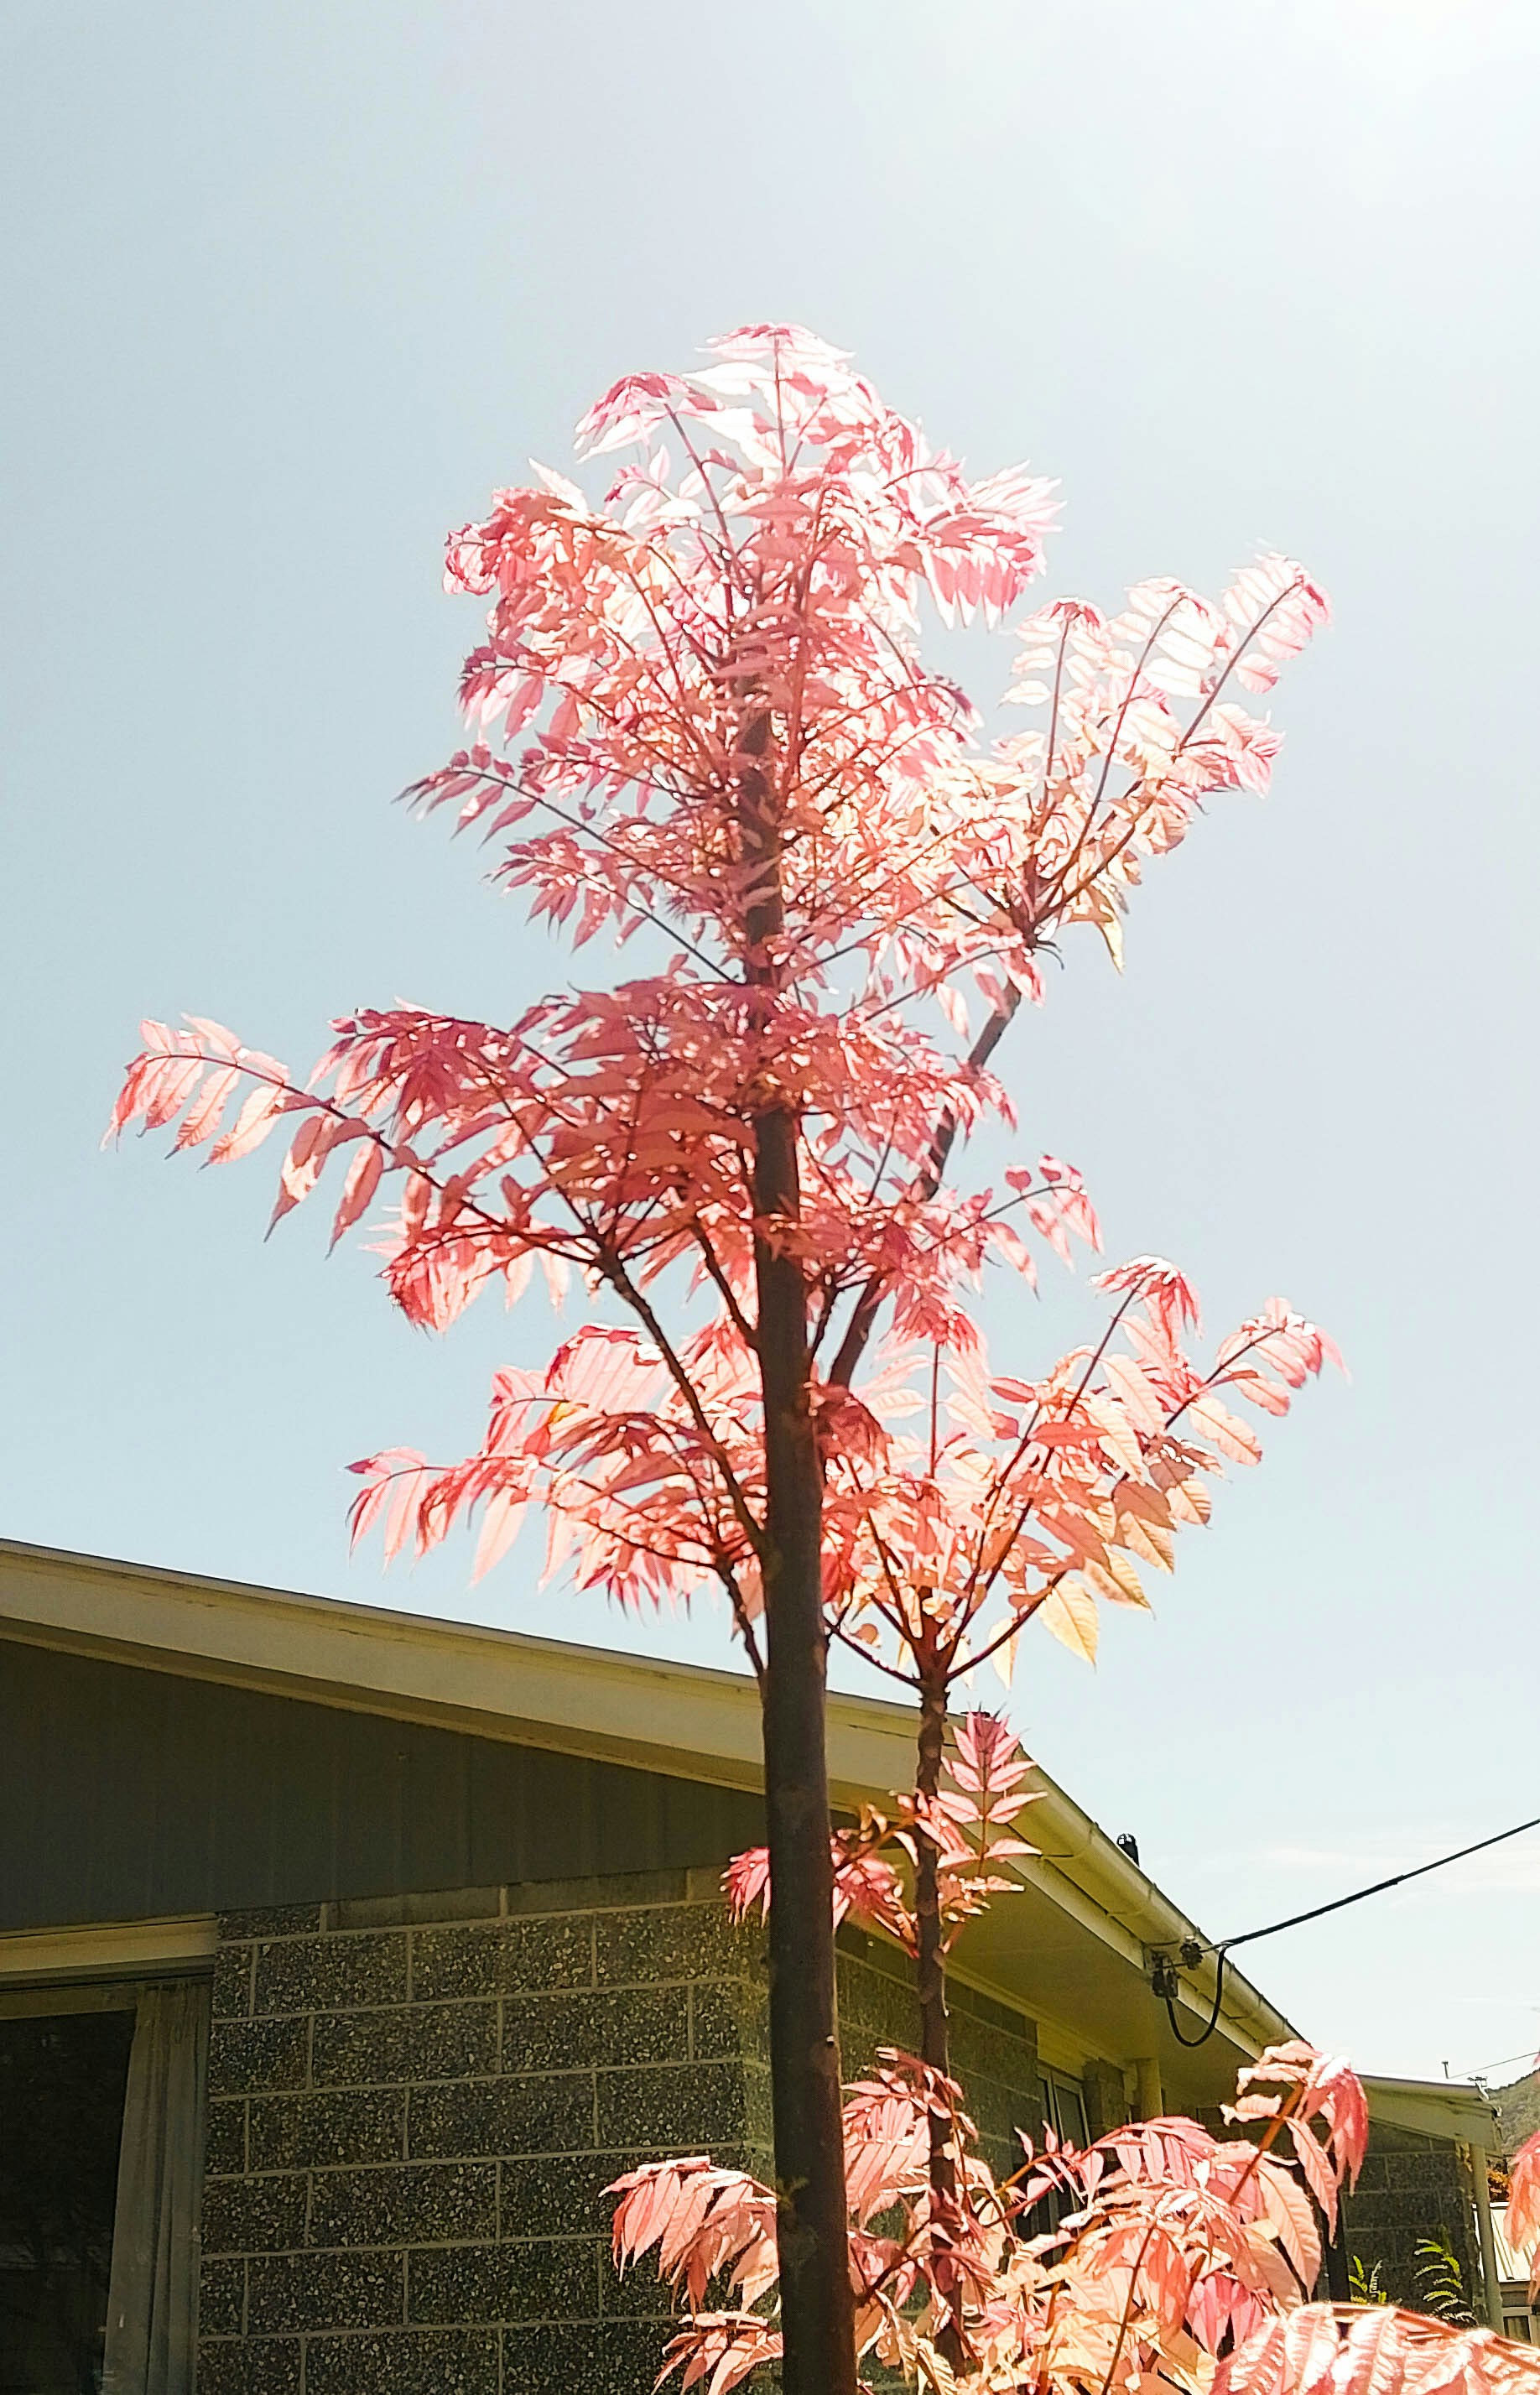 A tree with vibrant pink-red leaves stands against a clear blue sky, in front of a one-story house with a brick façade. The sunlight filters through the leaves, highlighting their color.